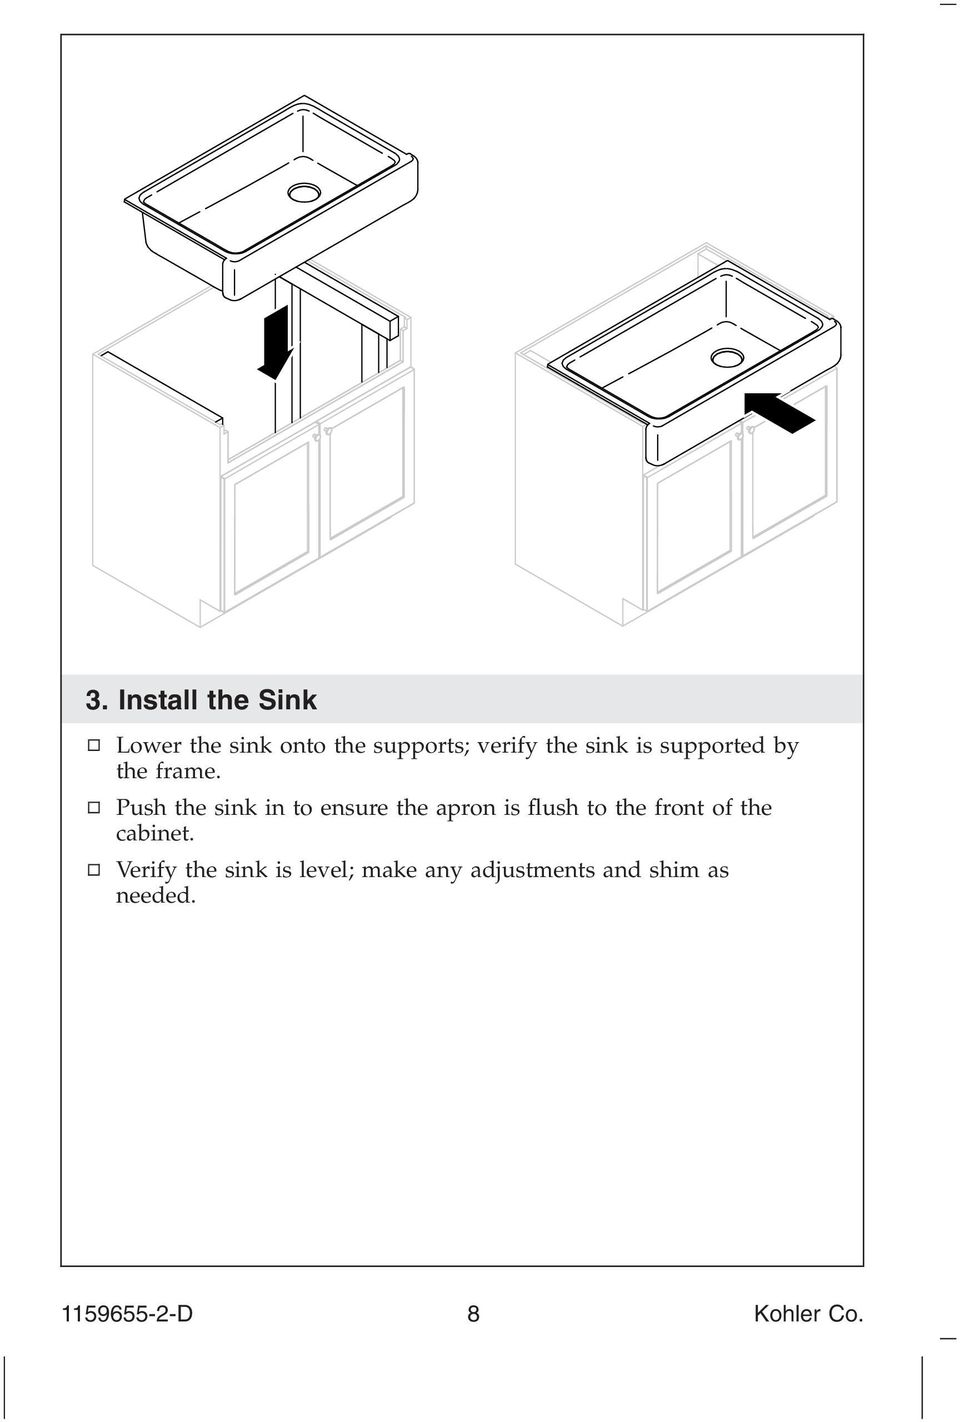 Push the sink in to ensure the apron is flush to the front of the